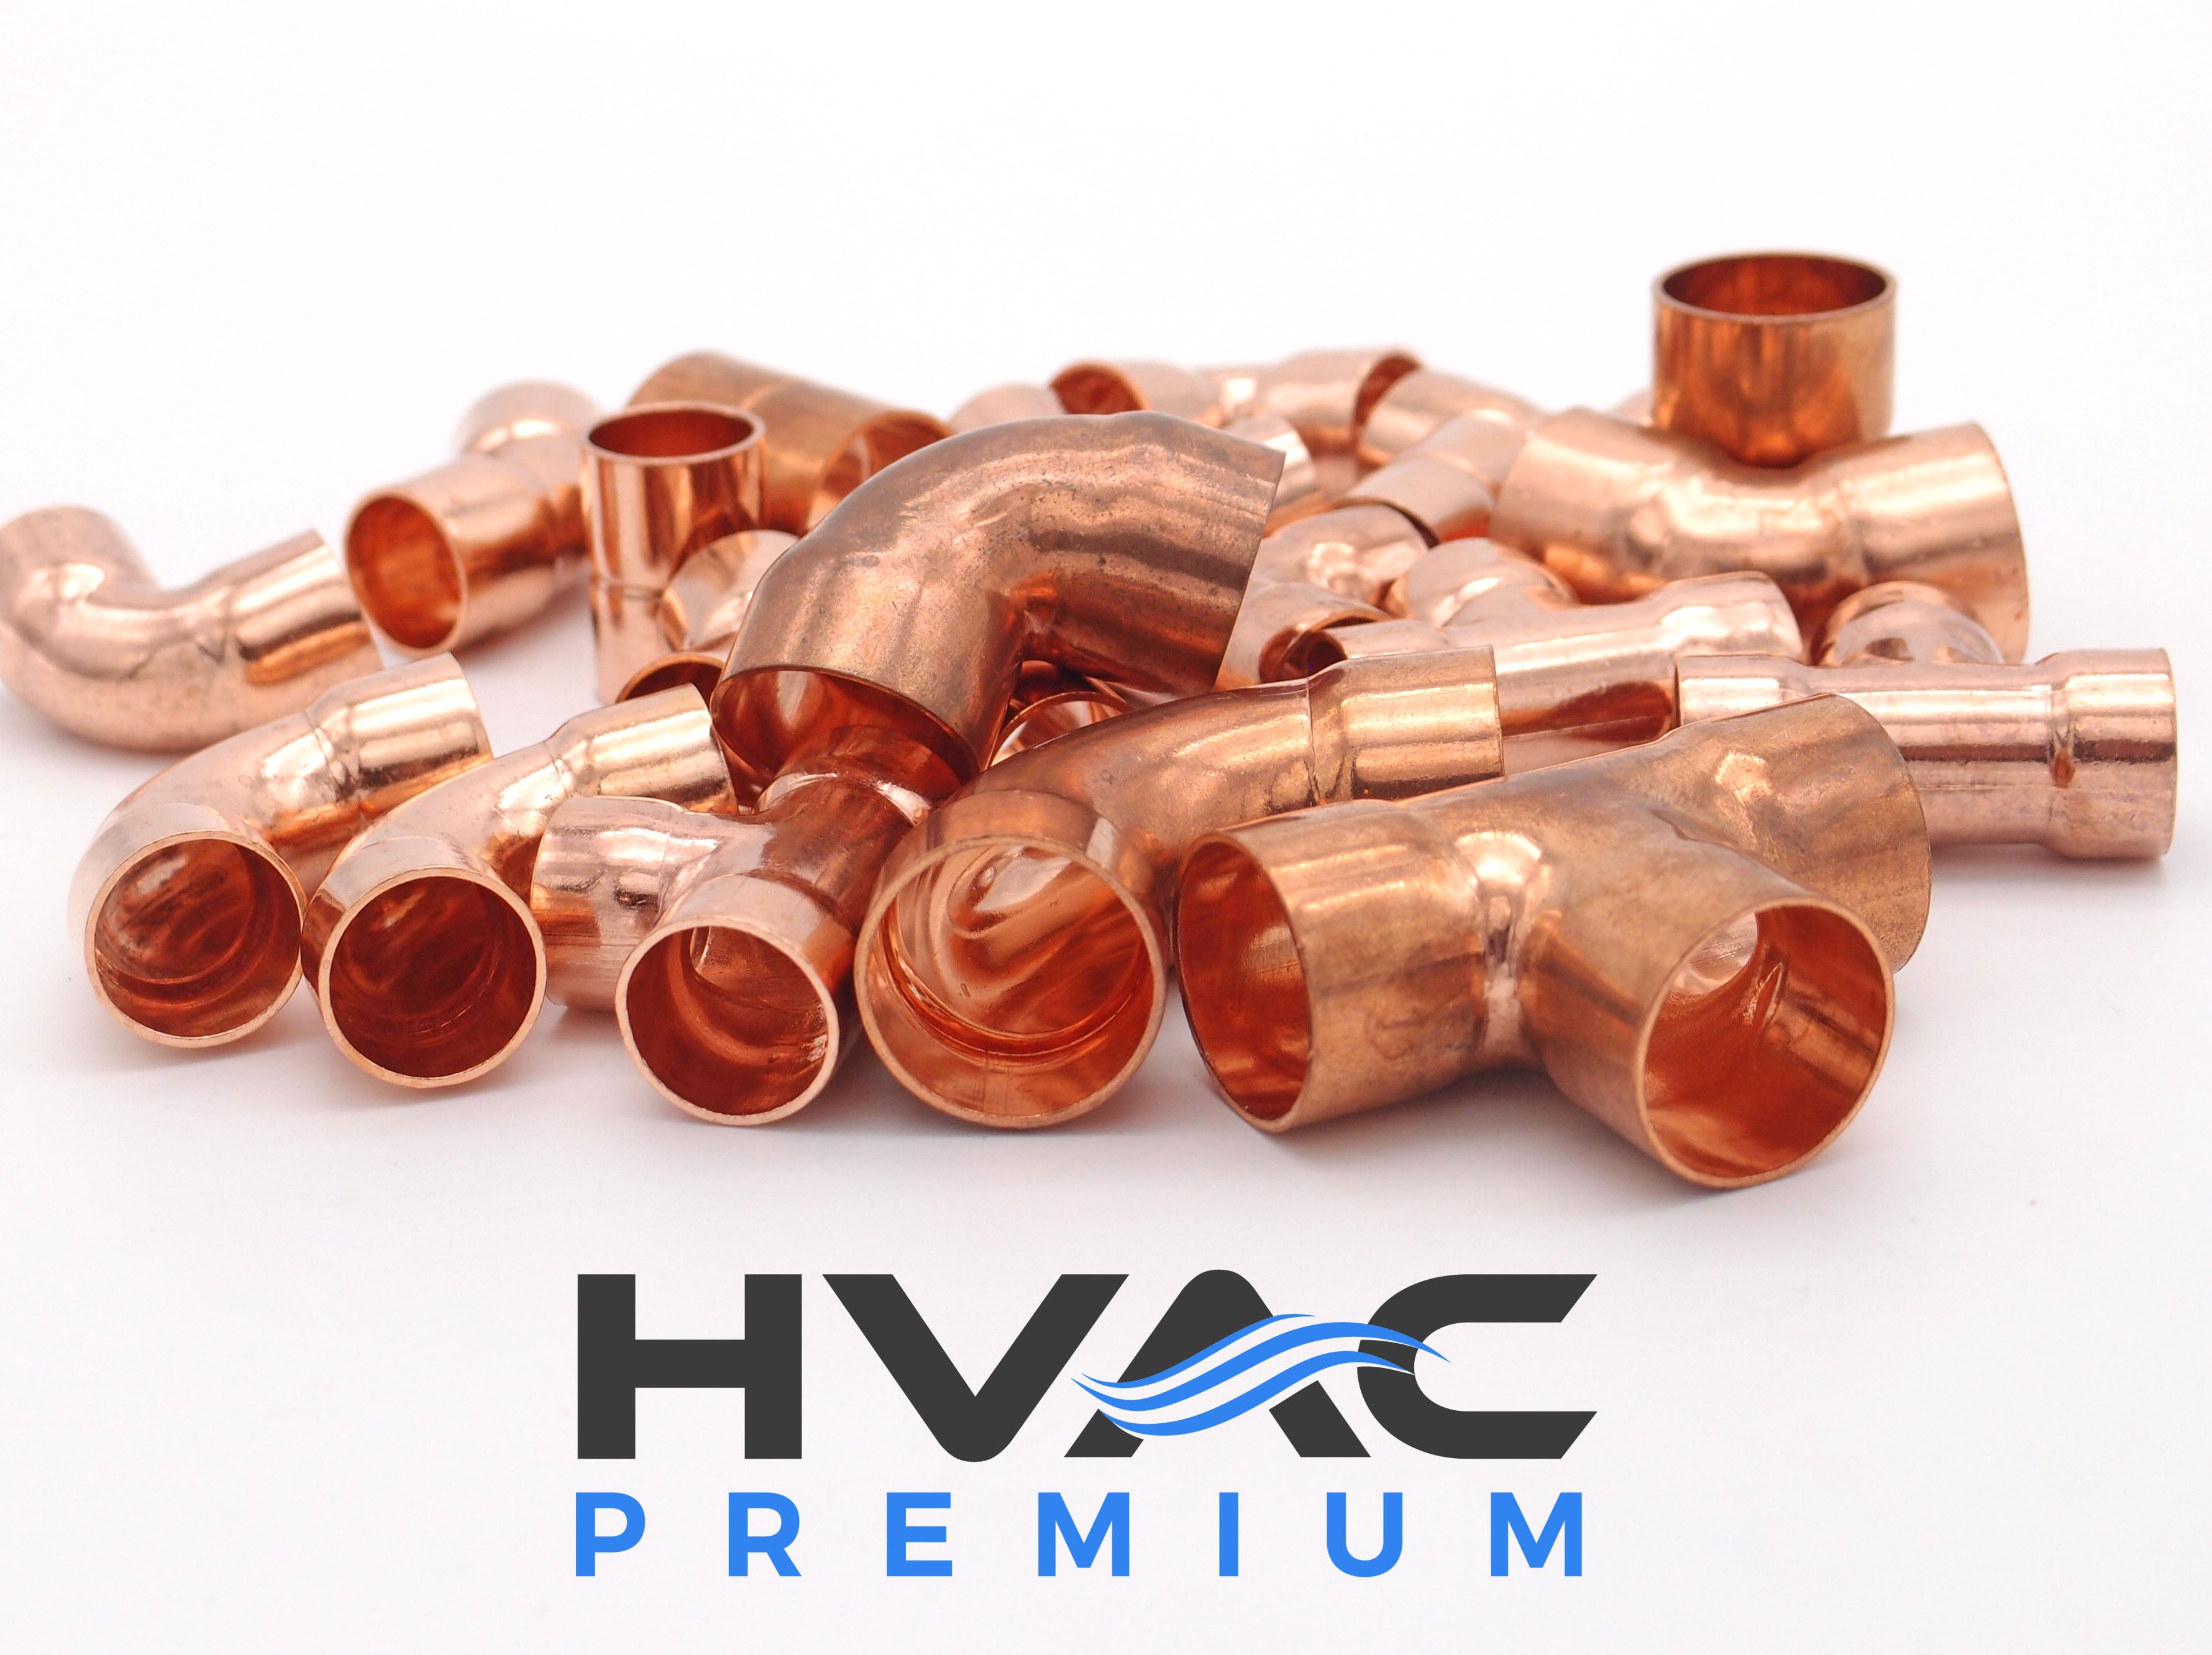 Copper Fitting 1-3/8 Inch (HVAC Outer Dimension) Inch (Plumbing Inner Dimension) - Straight Copper Coupling Fittings With Rolled Tube Stop & HVAC – 99.9% Pure Copper - 5 Pack